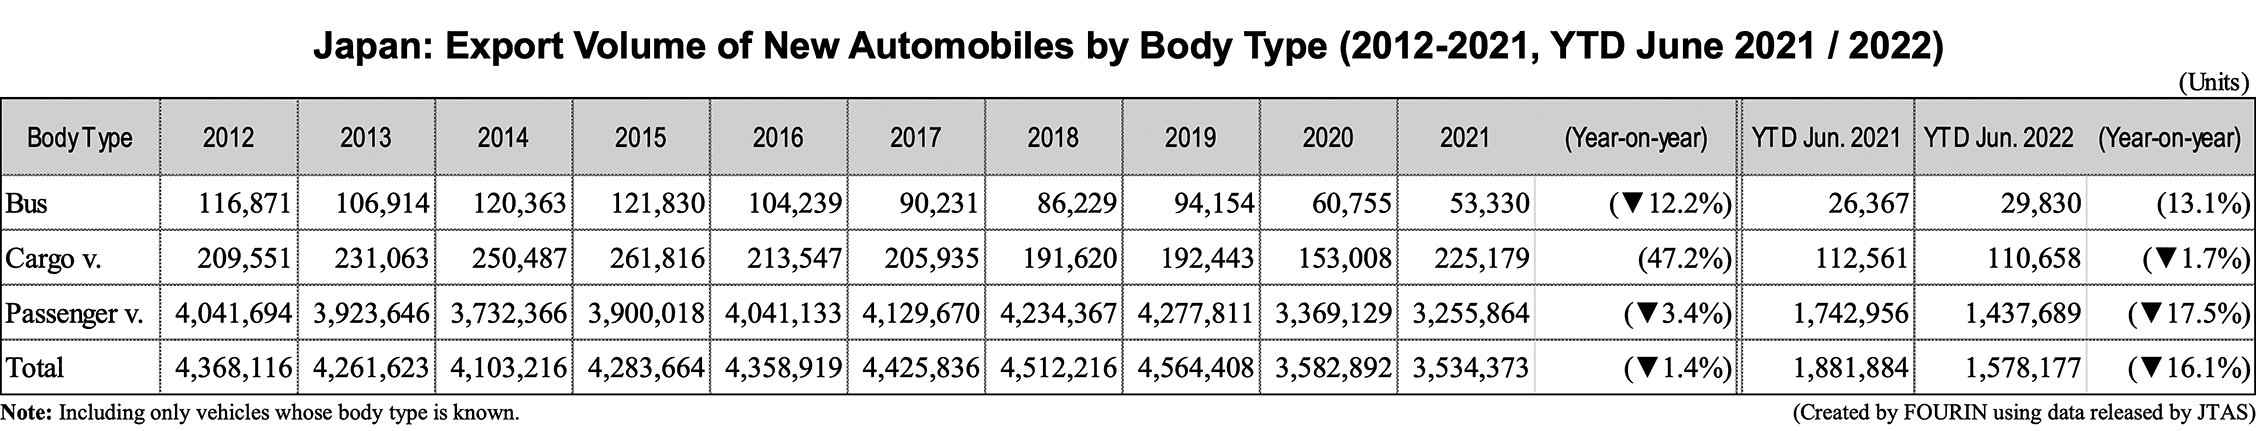 Table data: Japan: Export Volume of New Automobiles by Body Type (2012-2021, YTD June 2021 / 2022)